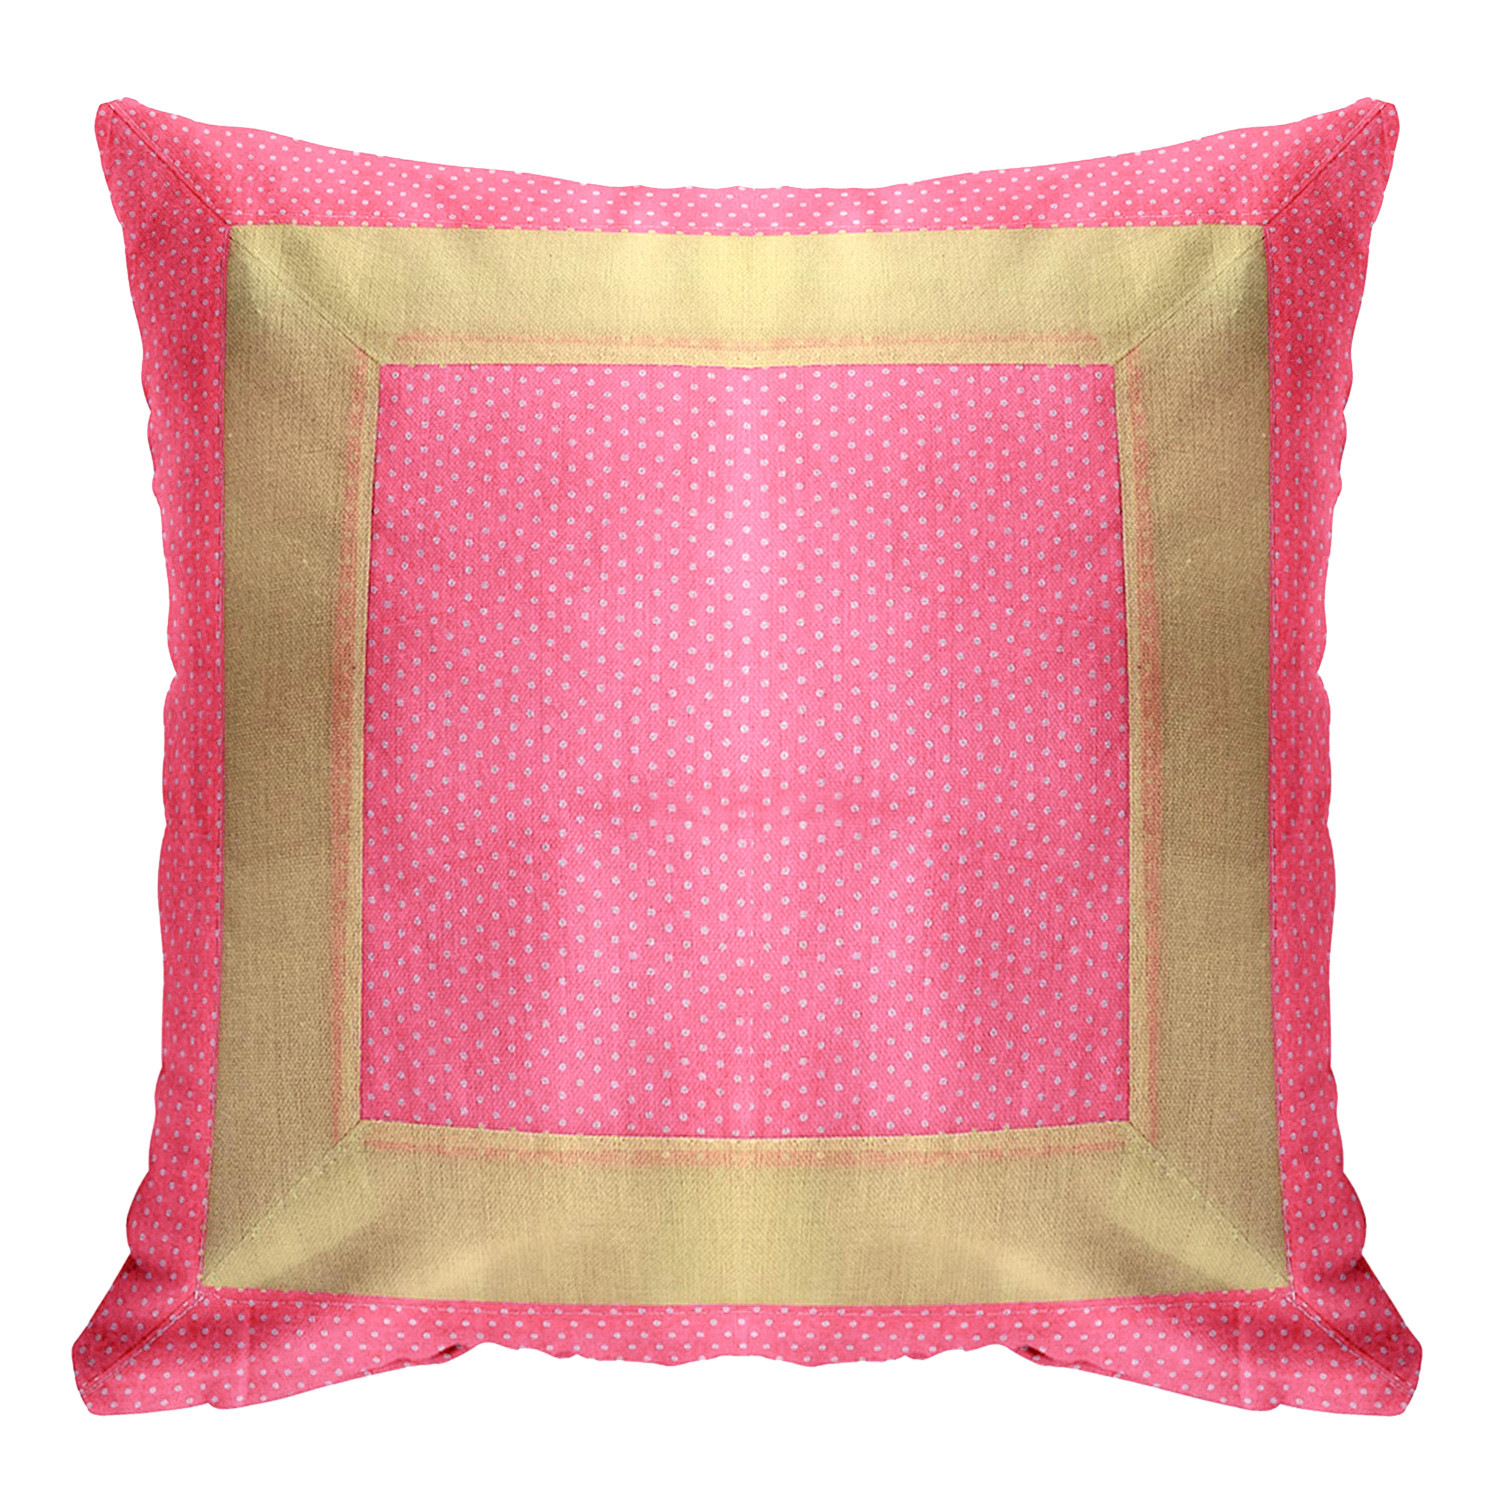 Kuber Industries Dot Print Soft Decorative Square Cushion Cover, Cushion Case For Sofa Couch Bed 16x16 Inch-(Light Pink)